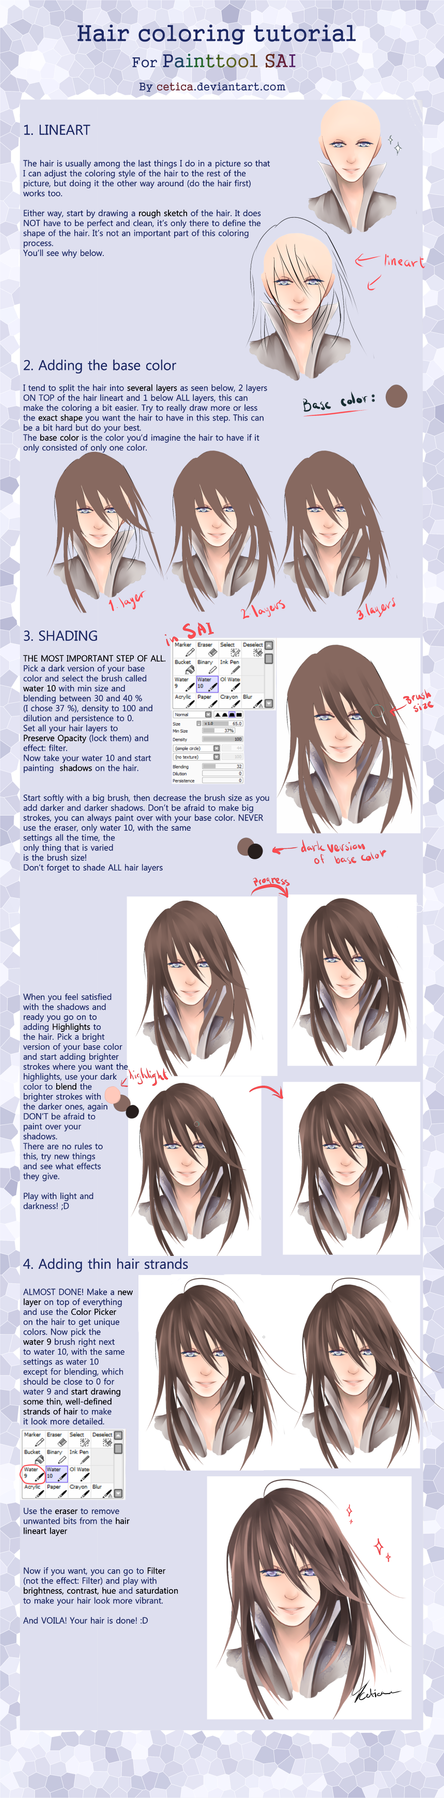 Hair Coloring Tutorial for Paint tool SAI by Circet on DeviantArt